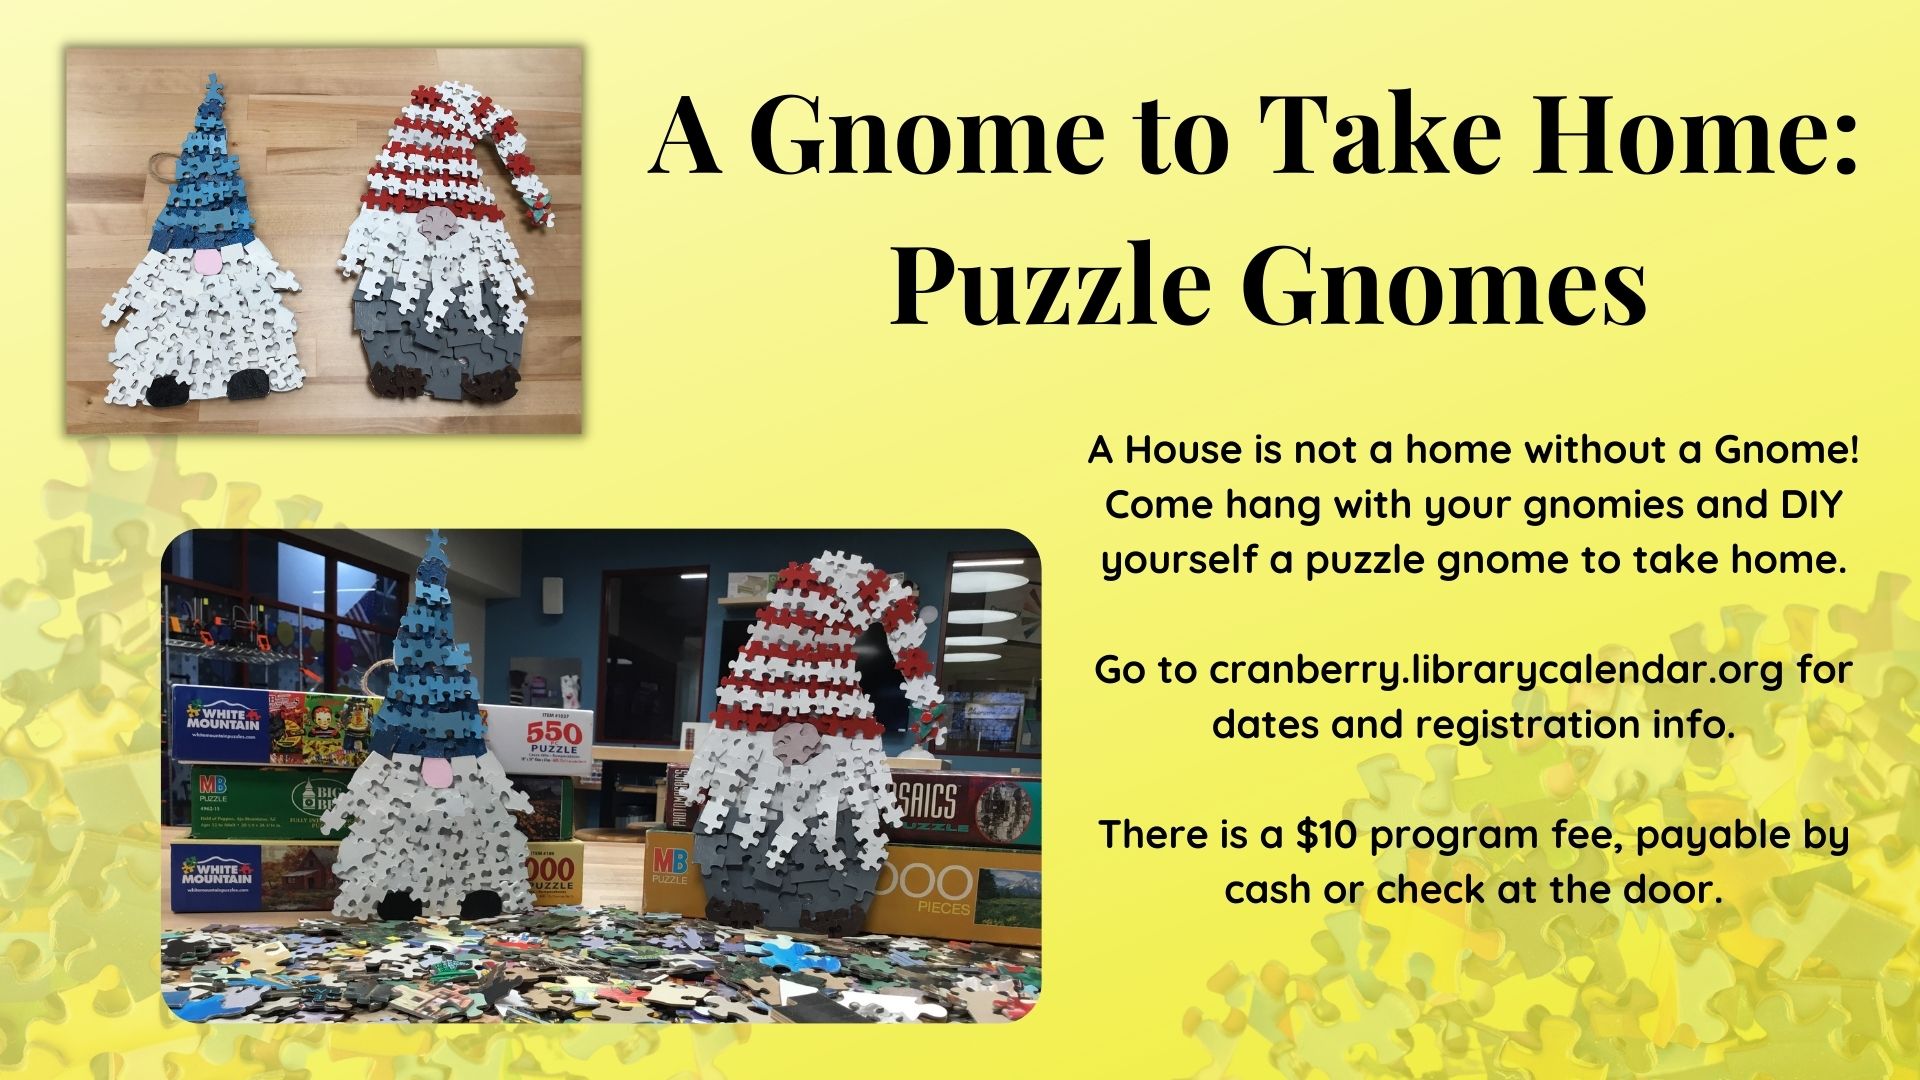 Flyer with Gnomes Made from puzzle pieces